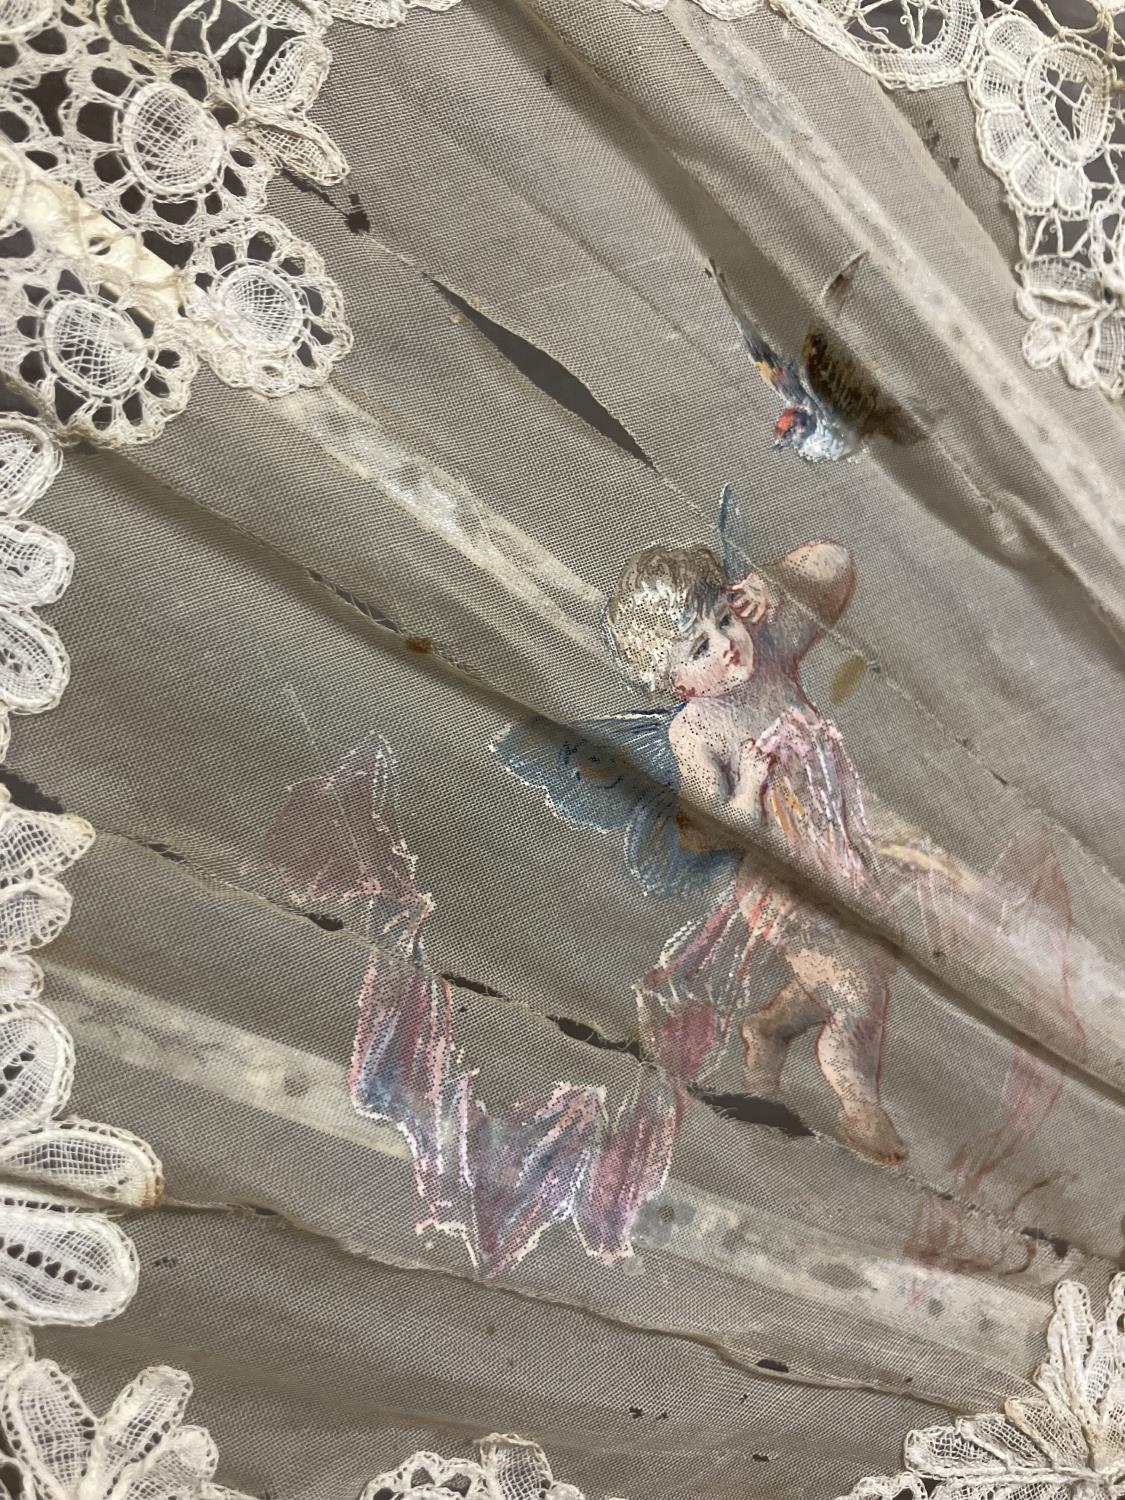 A good Brussels lace fan, mounted on mother of pearl, burgau, including the ribs, the leaf most - Image 12 of 13